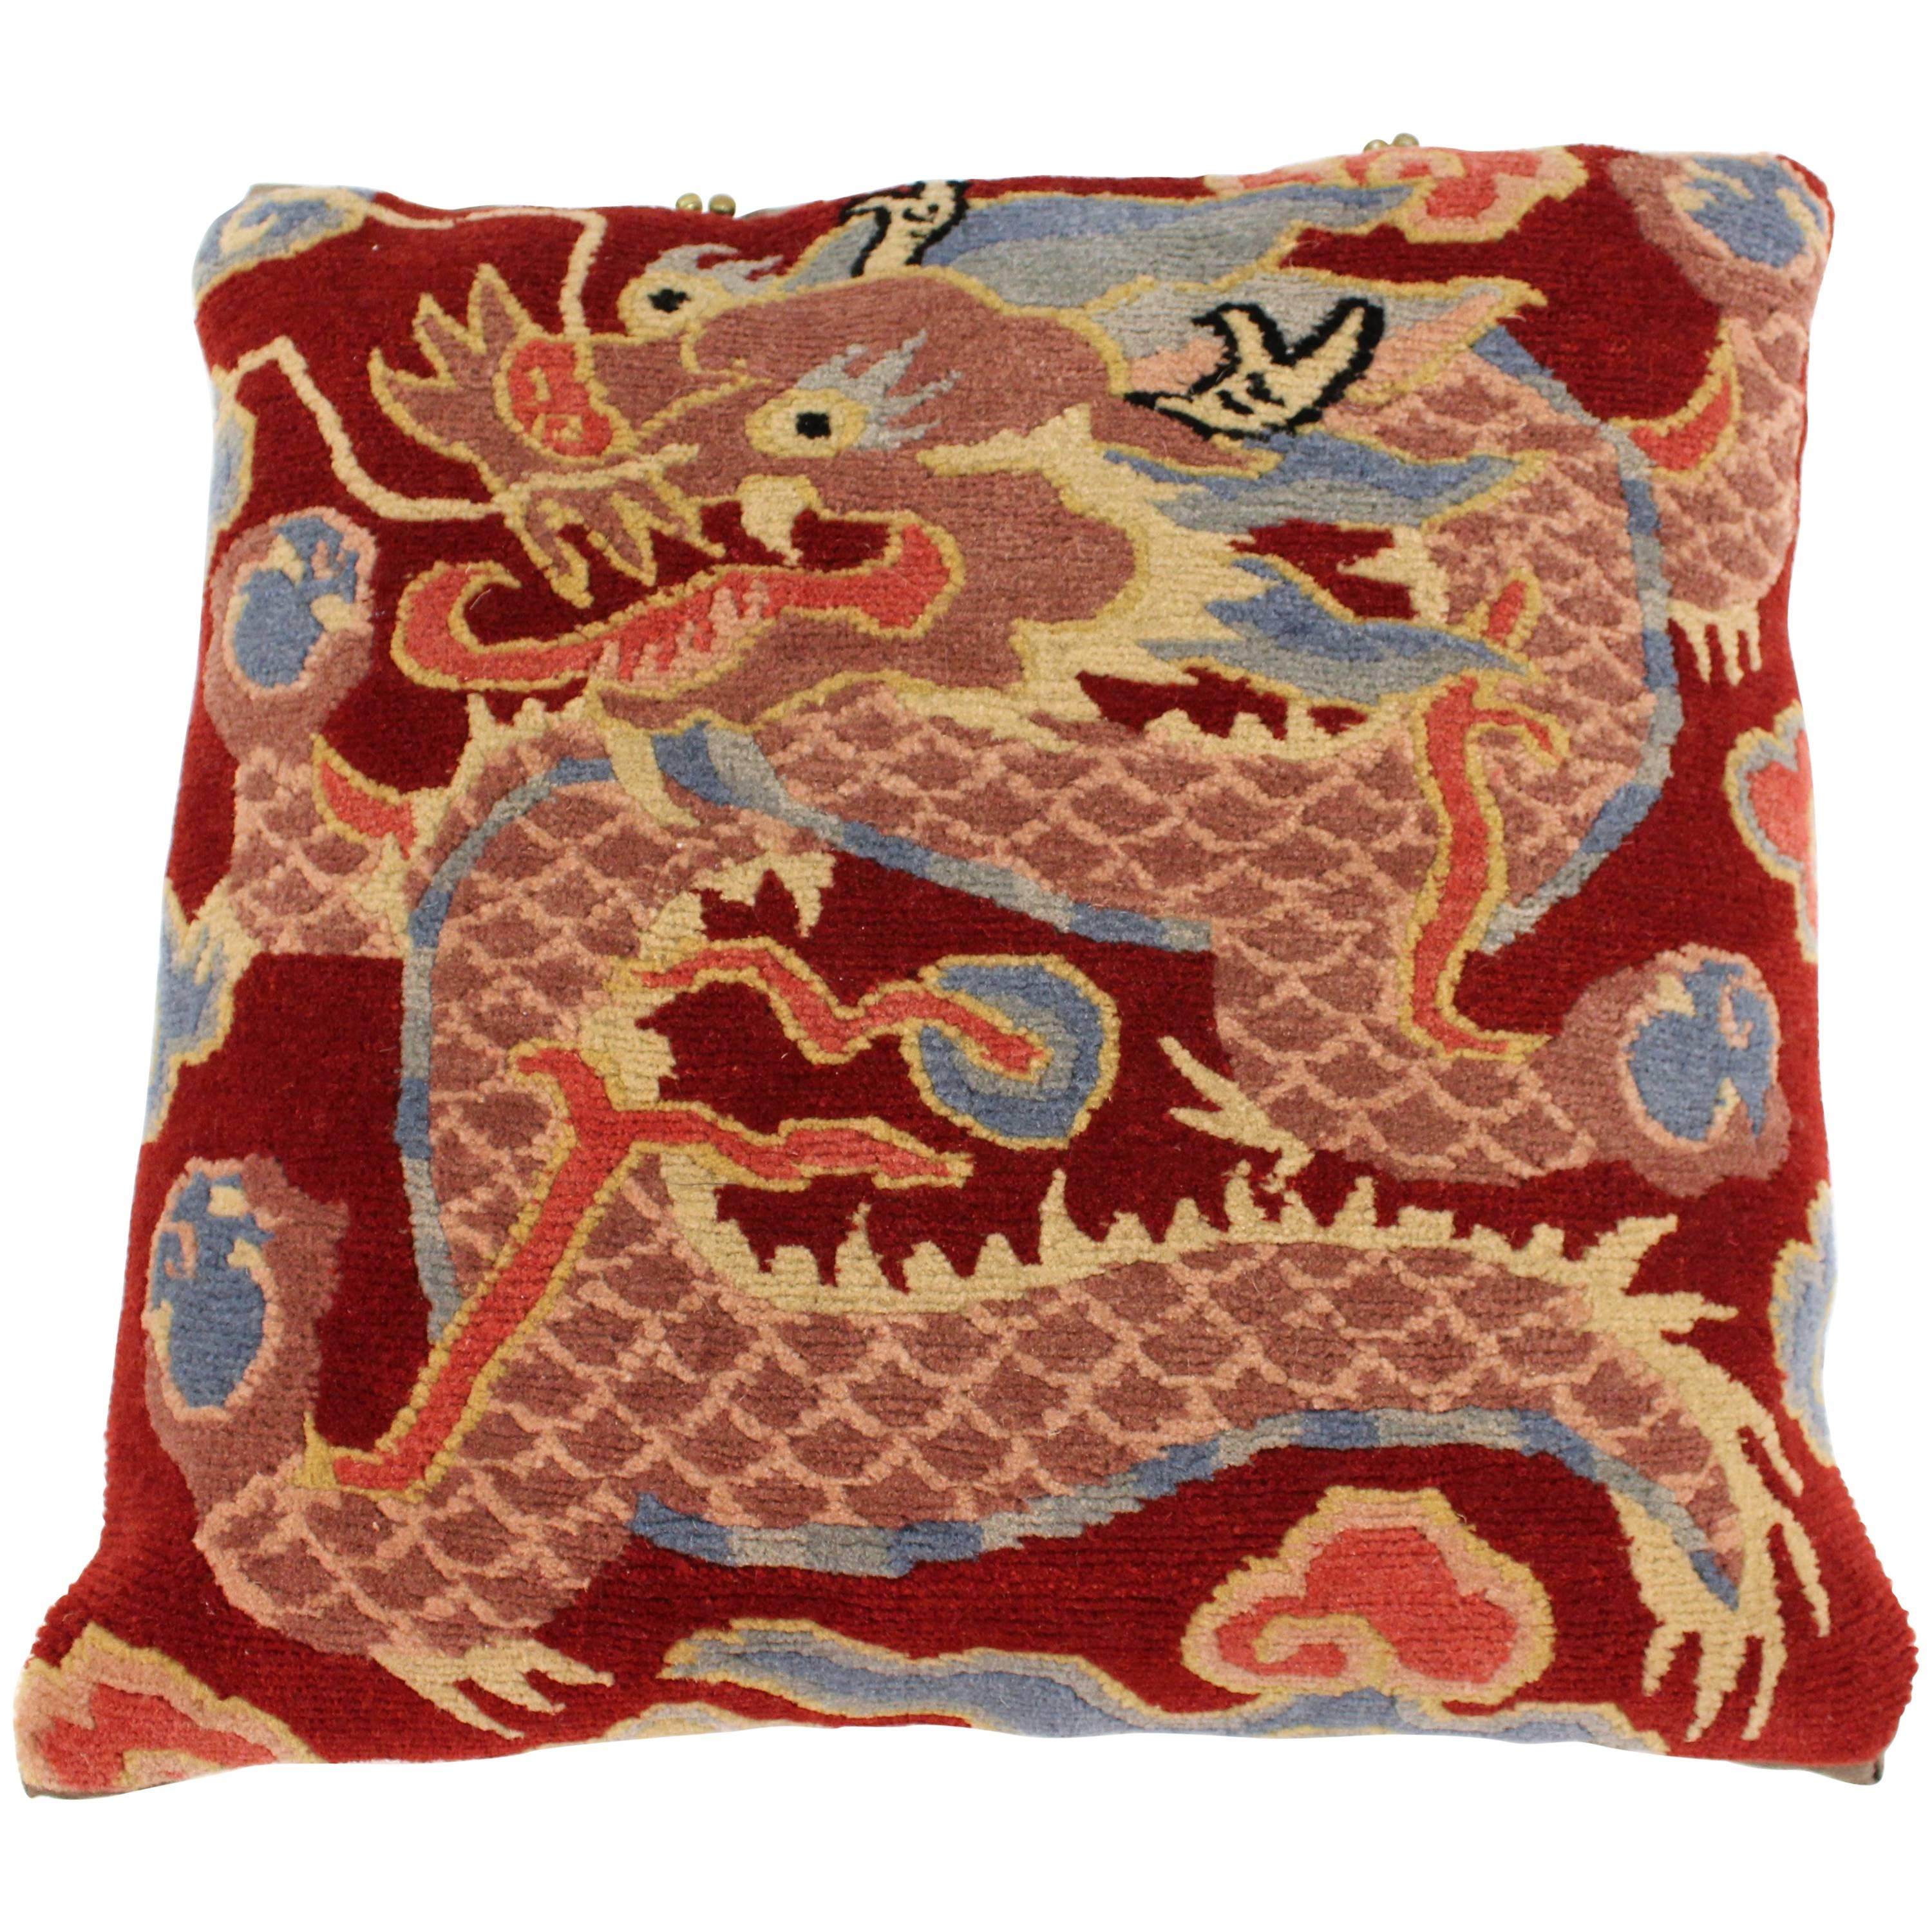 Asian Inspired Dragon Pillow in Wool